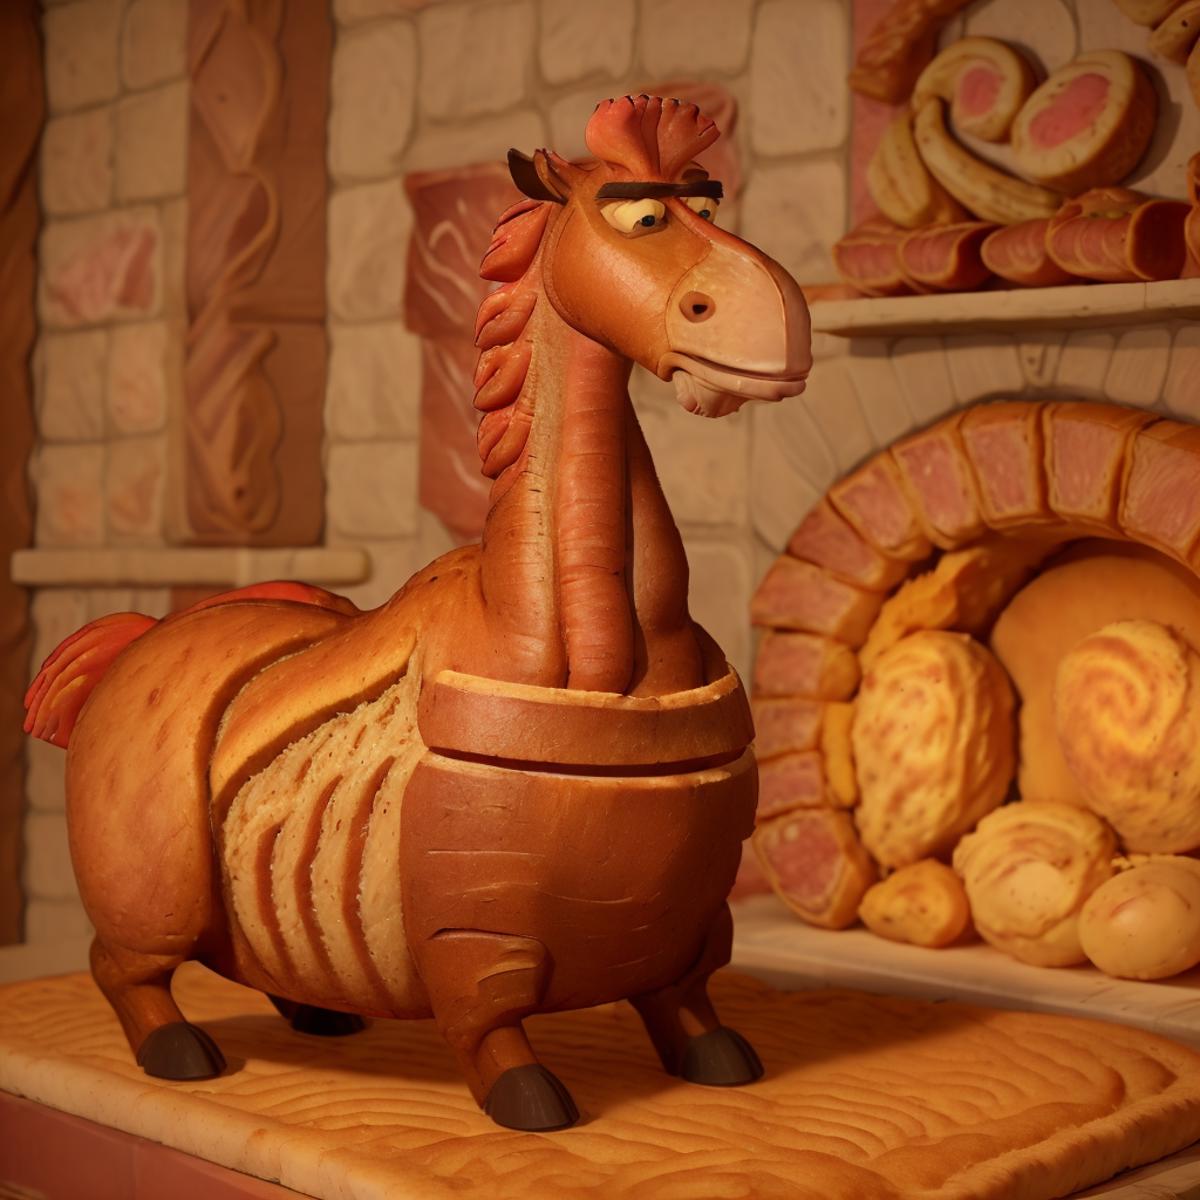 A cake designed to look like a horse with a loaf of bread for a head.